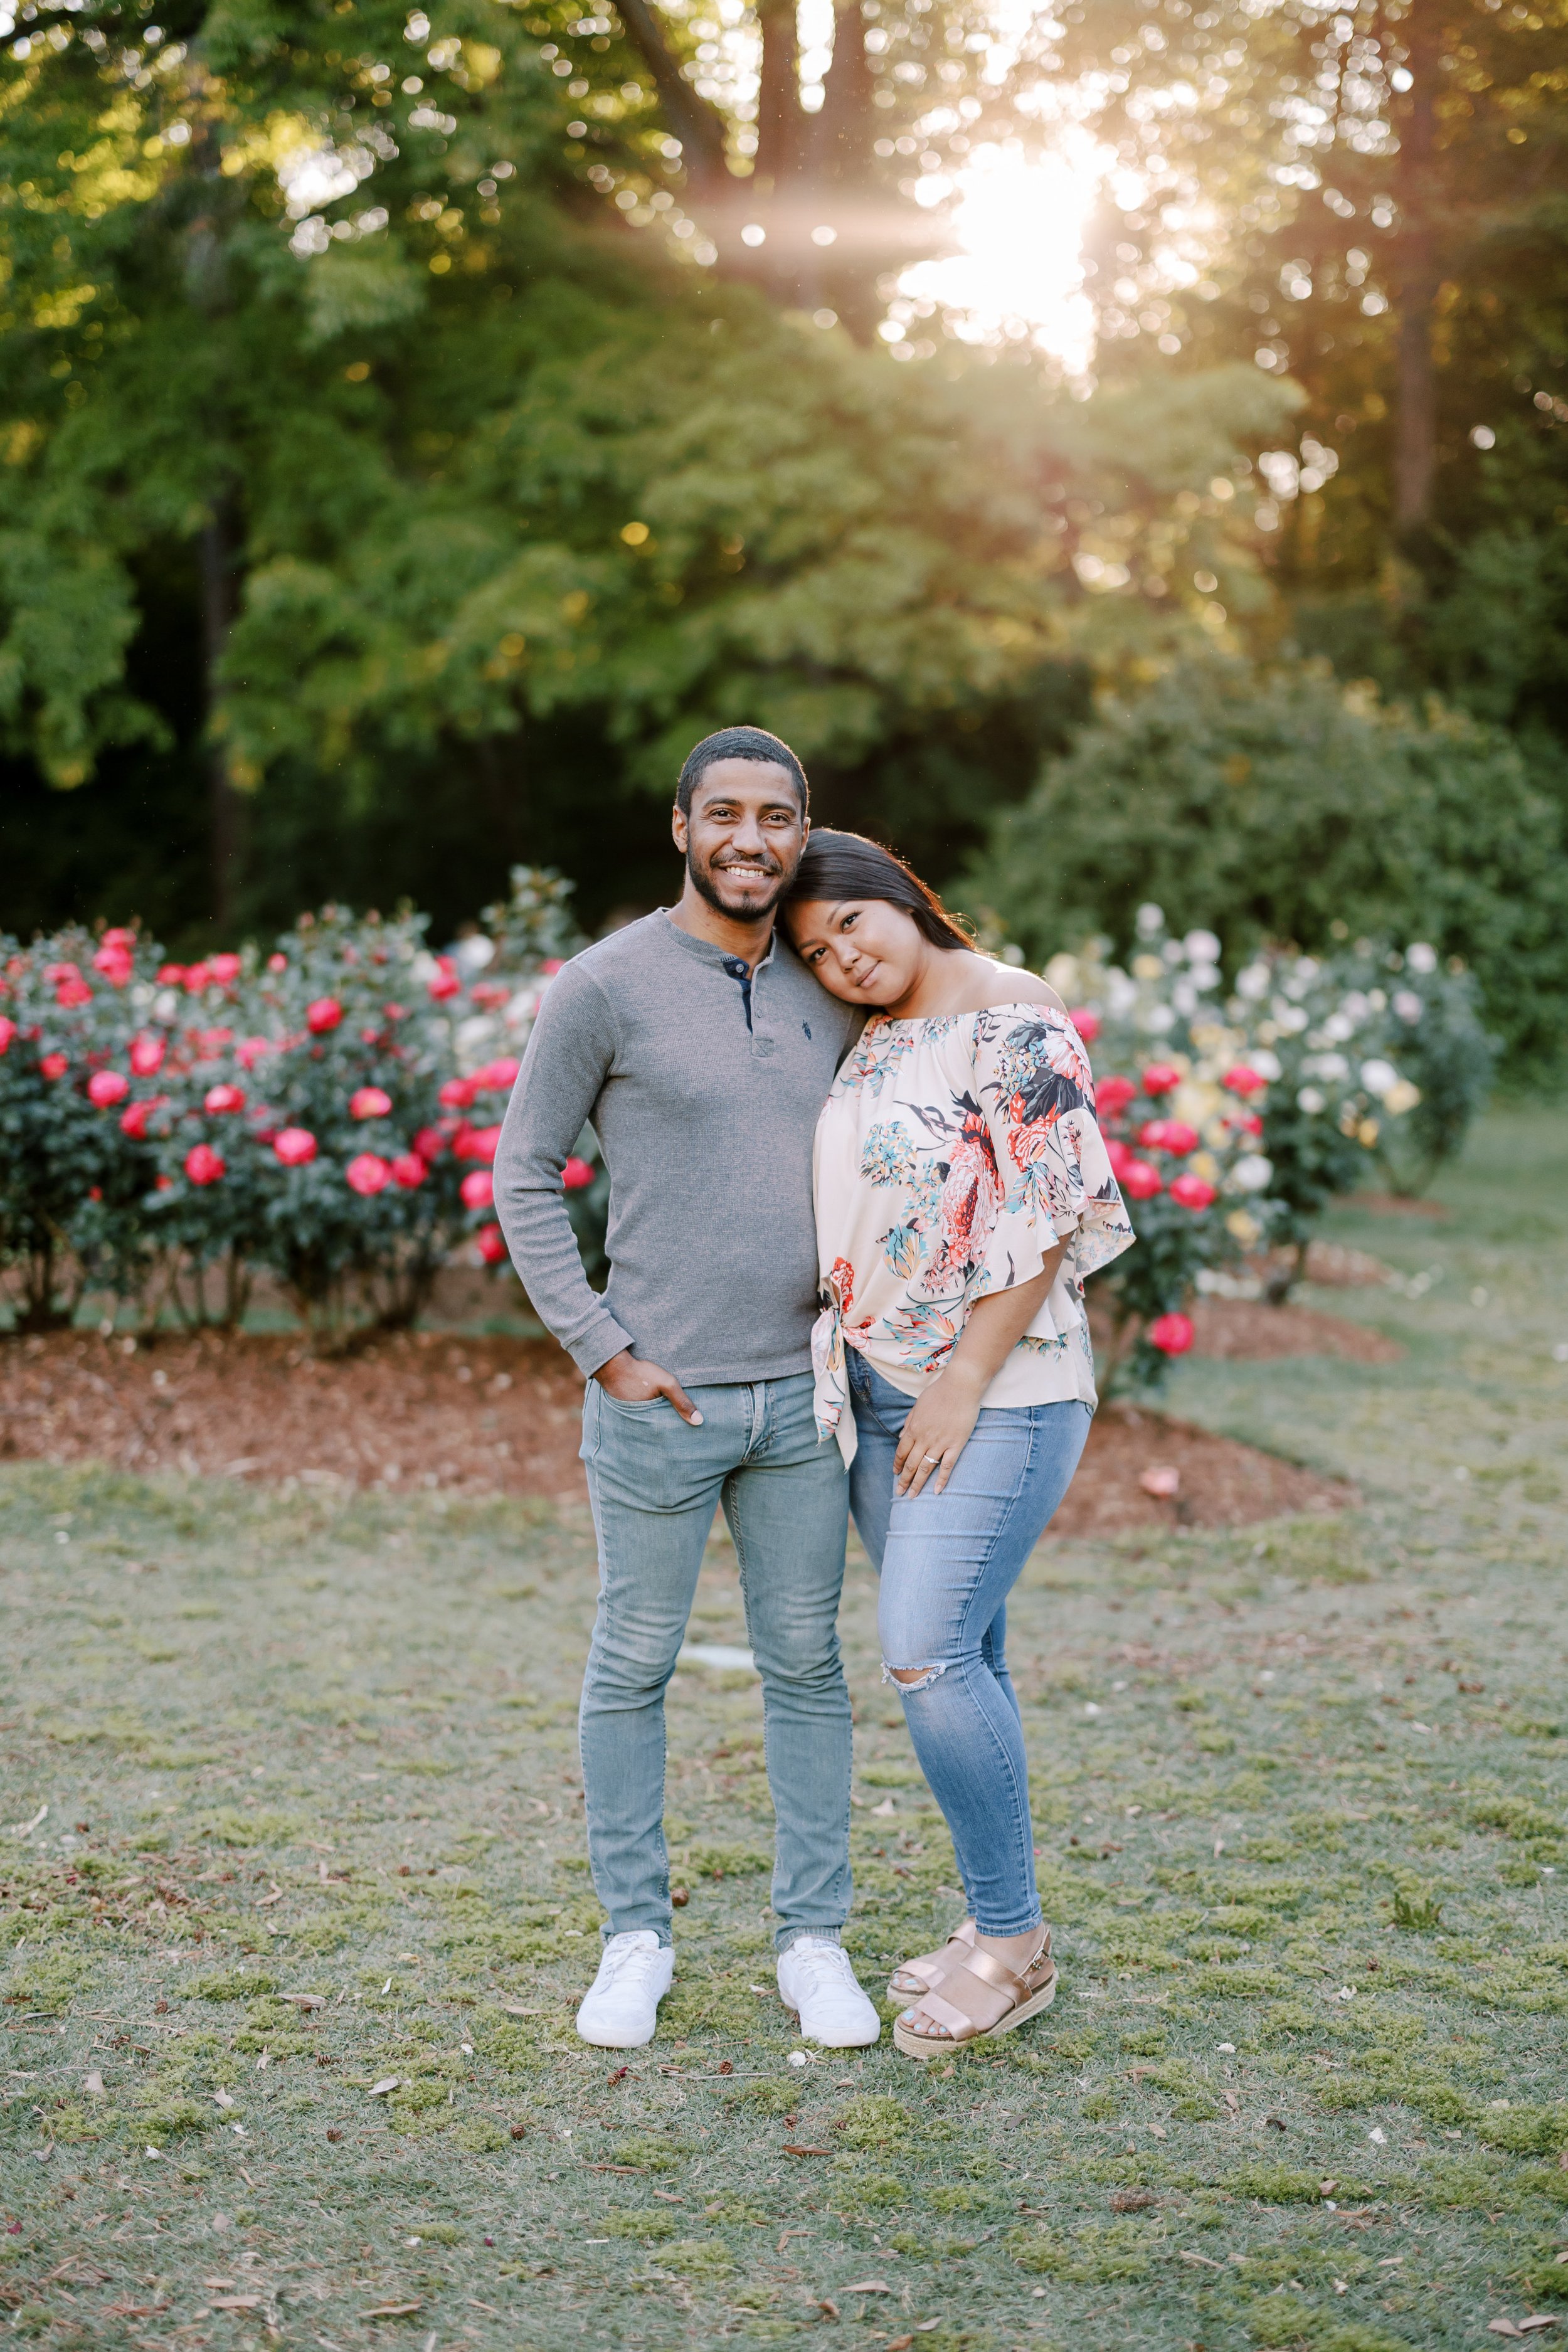 Sunset Rose Garden Engagement Photos in The Raleigh Rose Garden Fancy This Photography